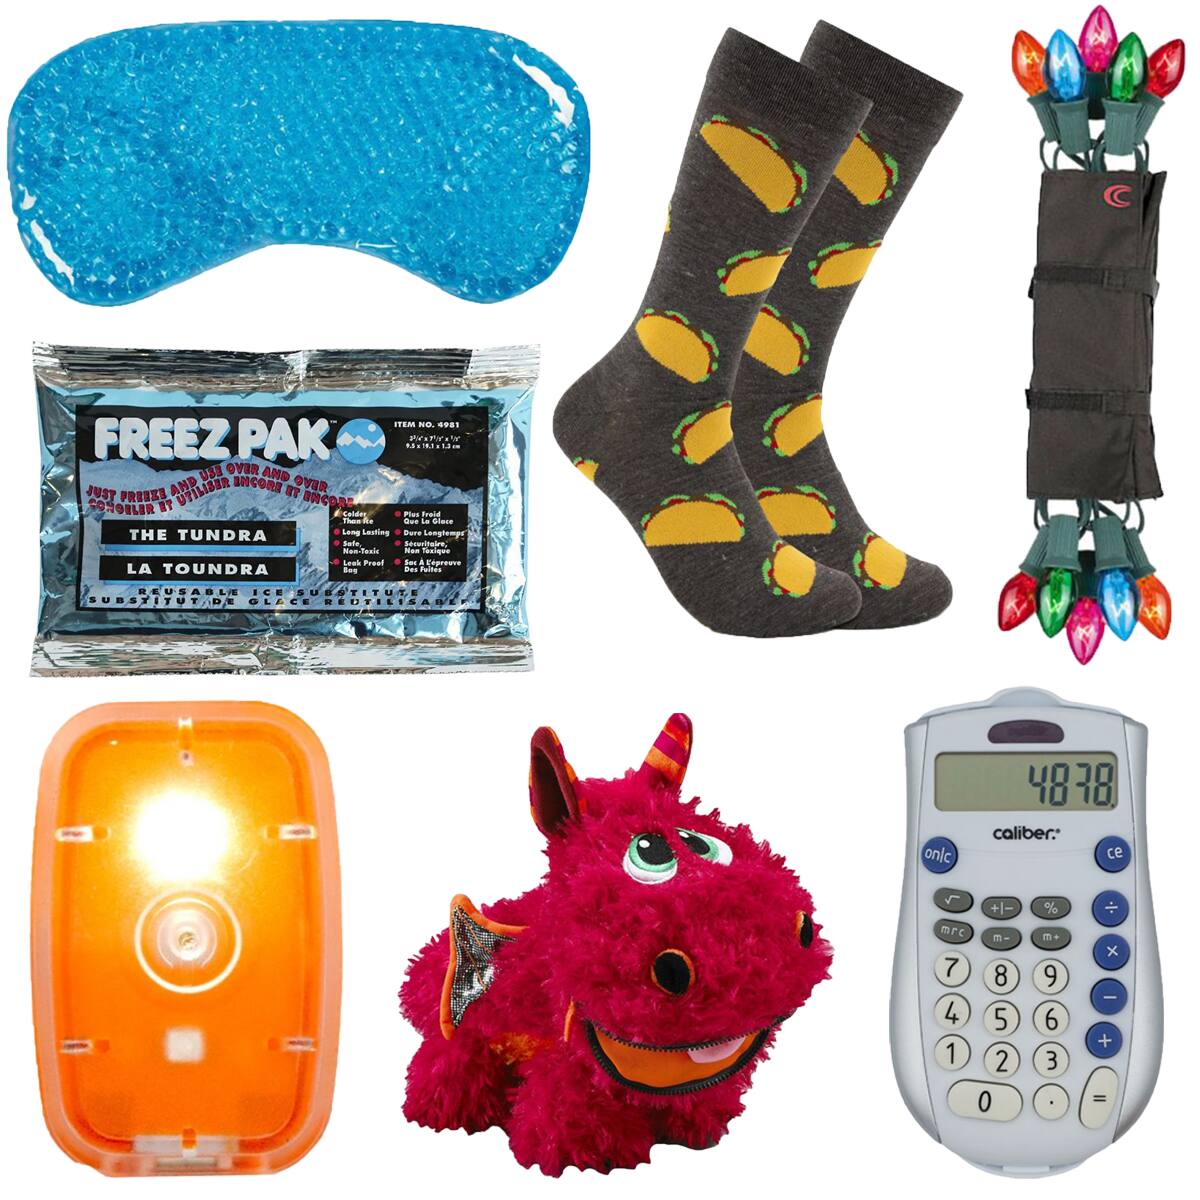 $1.00 Deals - USB Light, Freeze Pak, Baby Stuffies and More